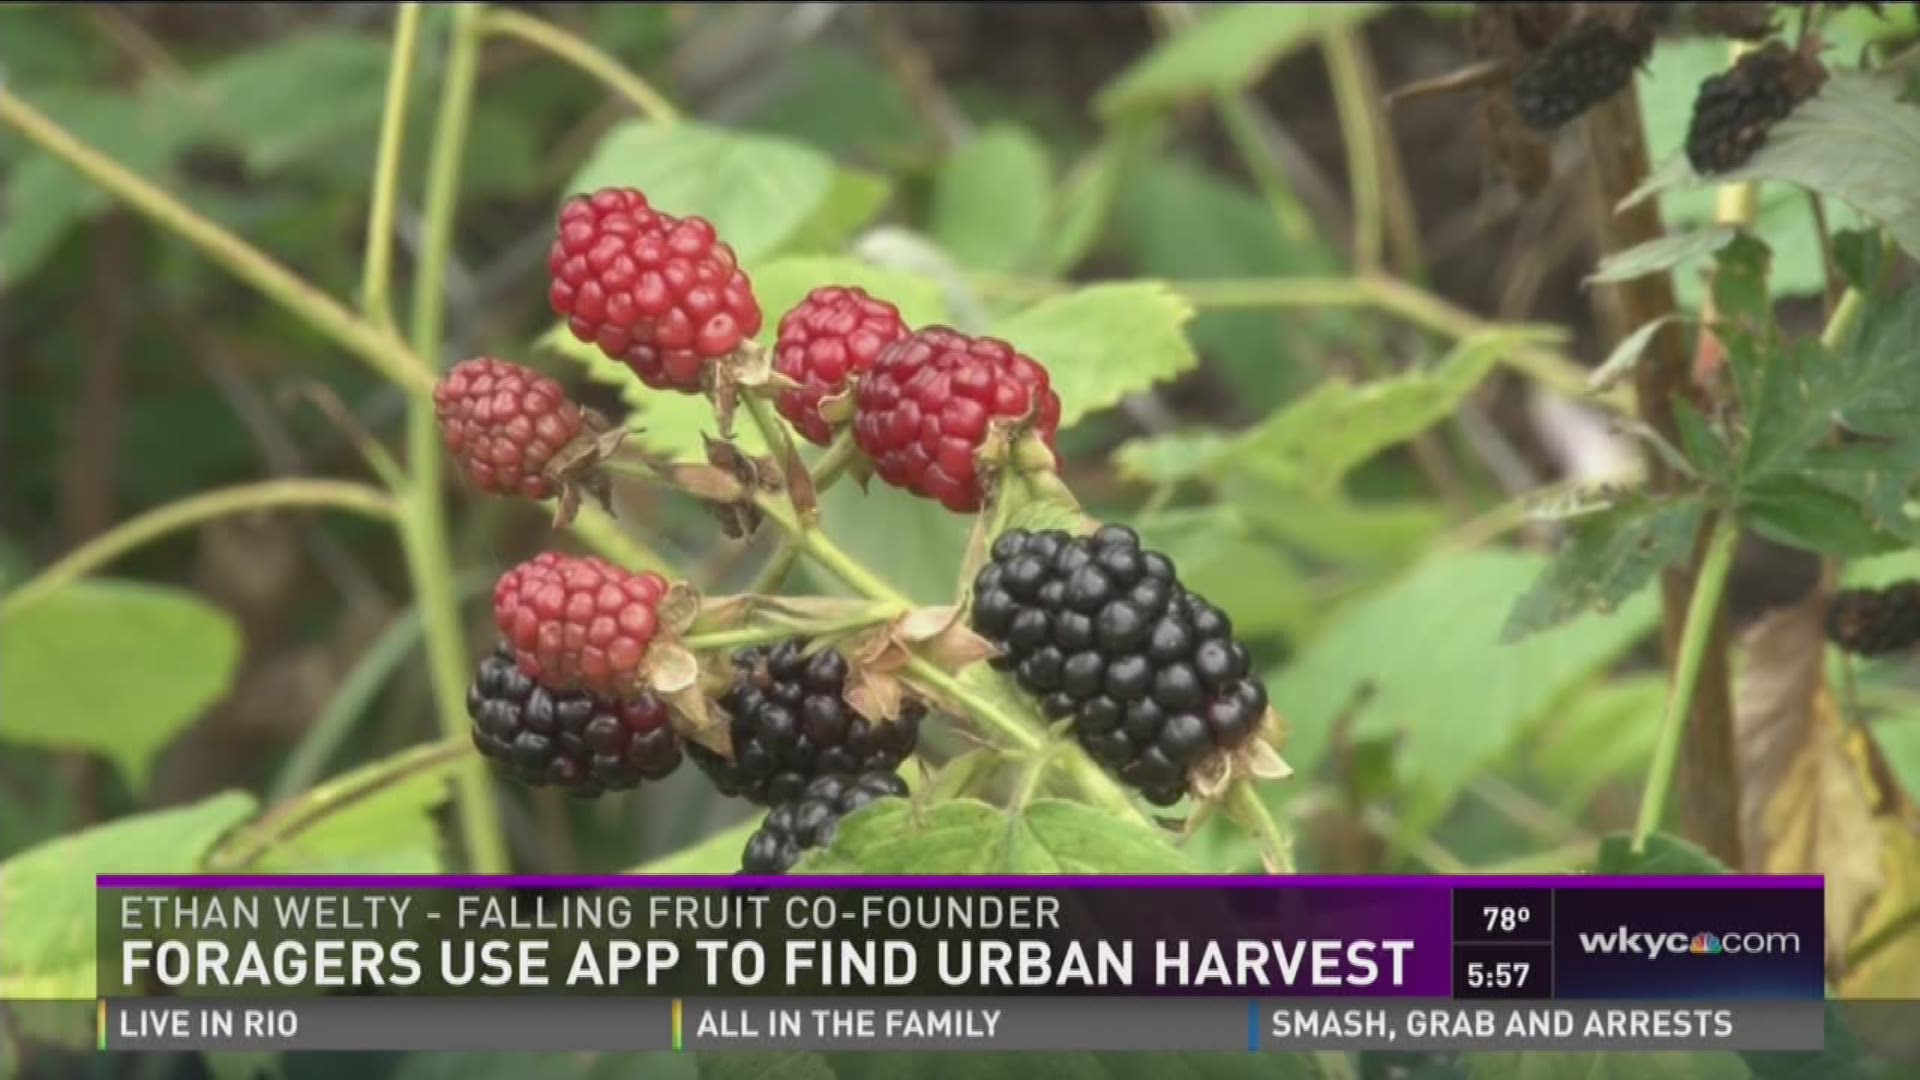 Foragers use app to find urban harvest